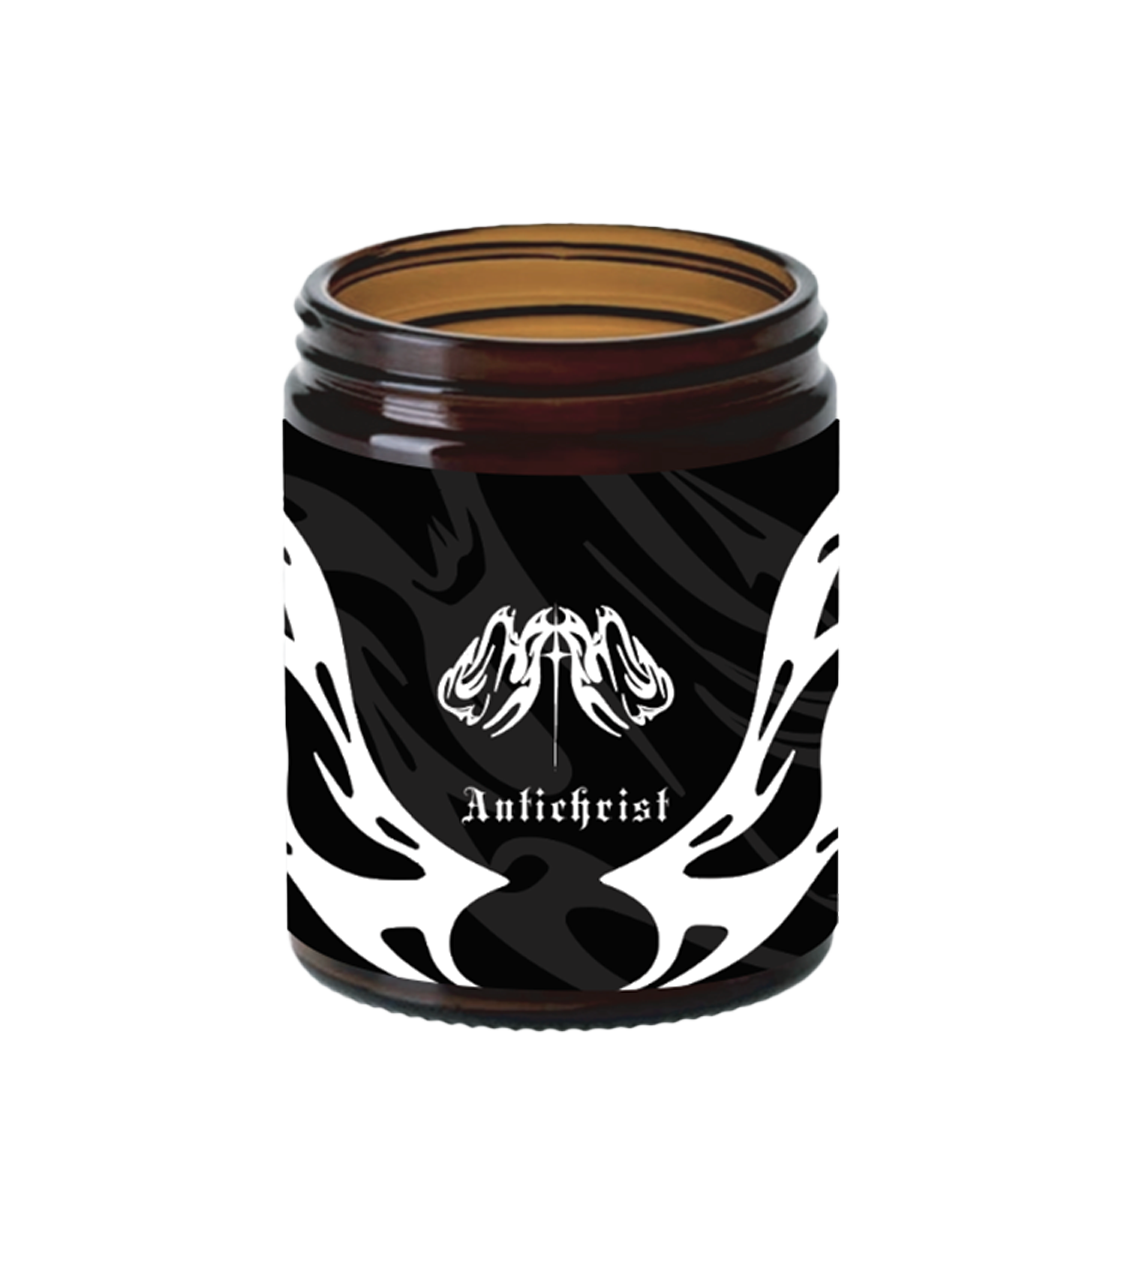 Holly Humberstone - Holly Humberstone Antichrist Candle